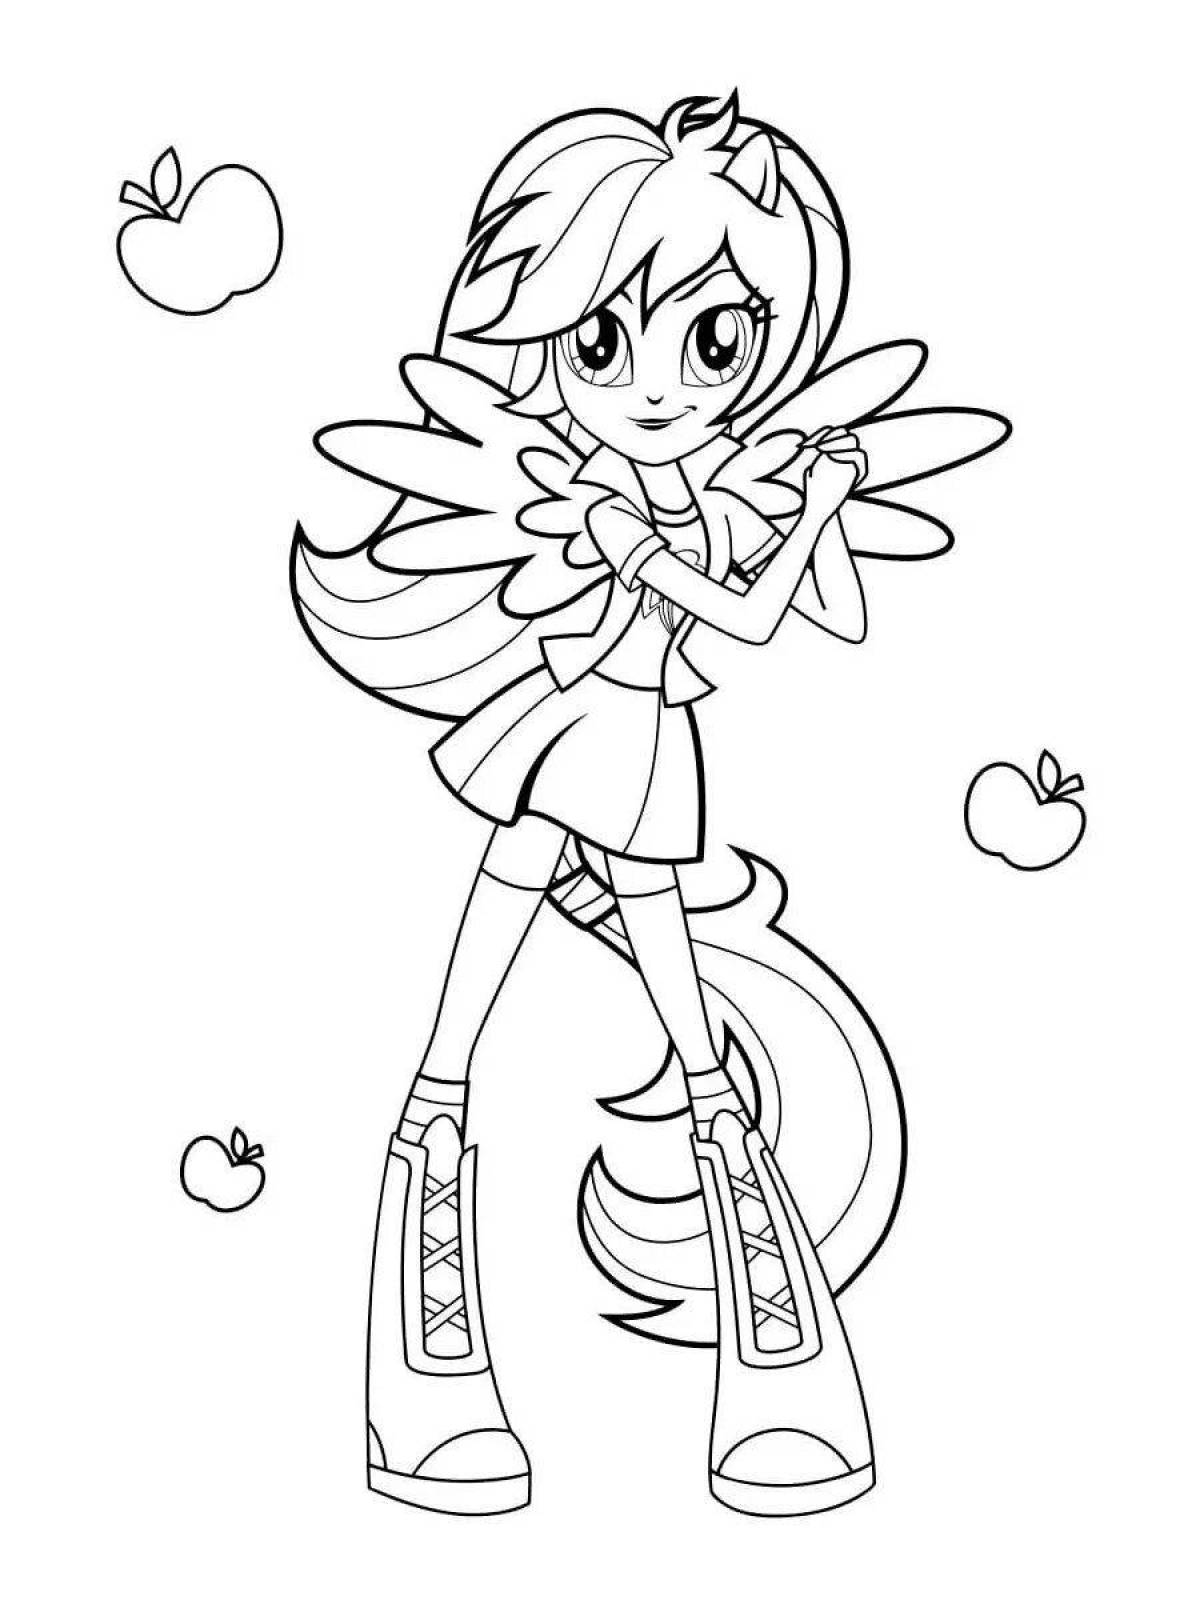 Awesome equestria coloring page